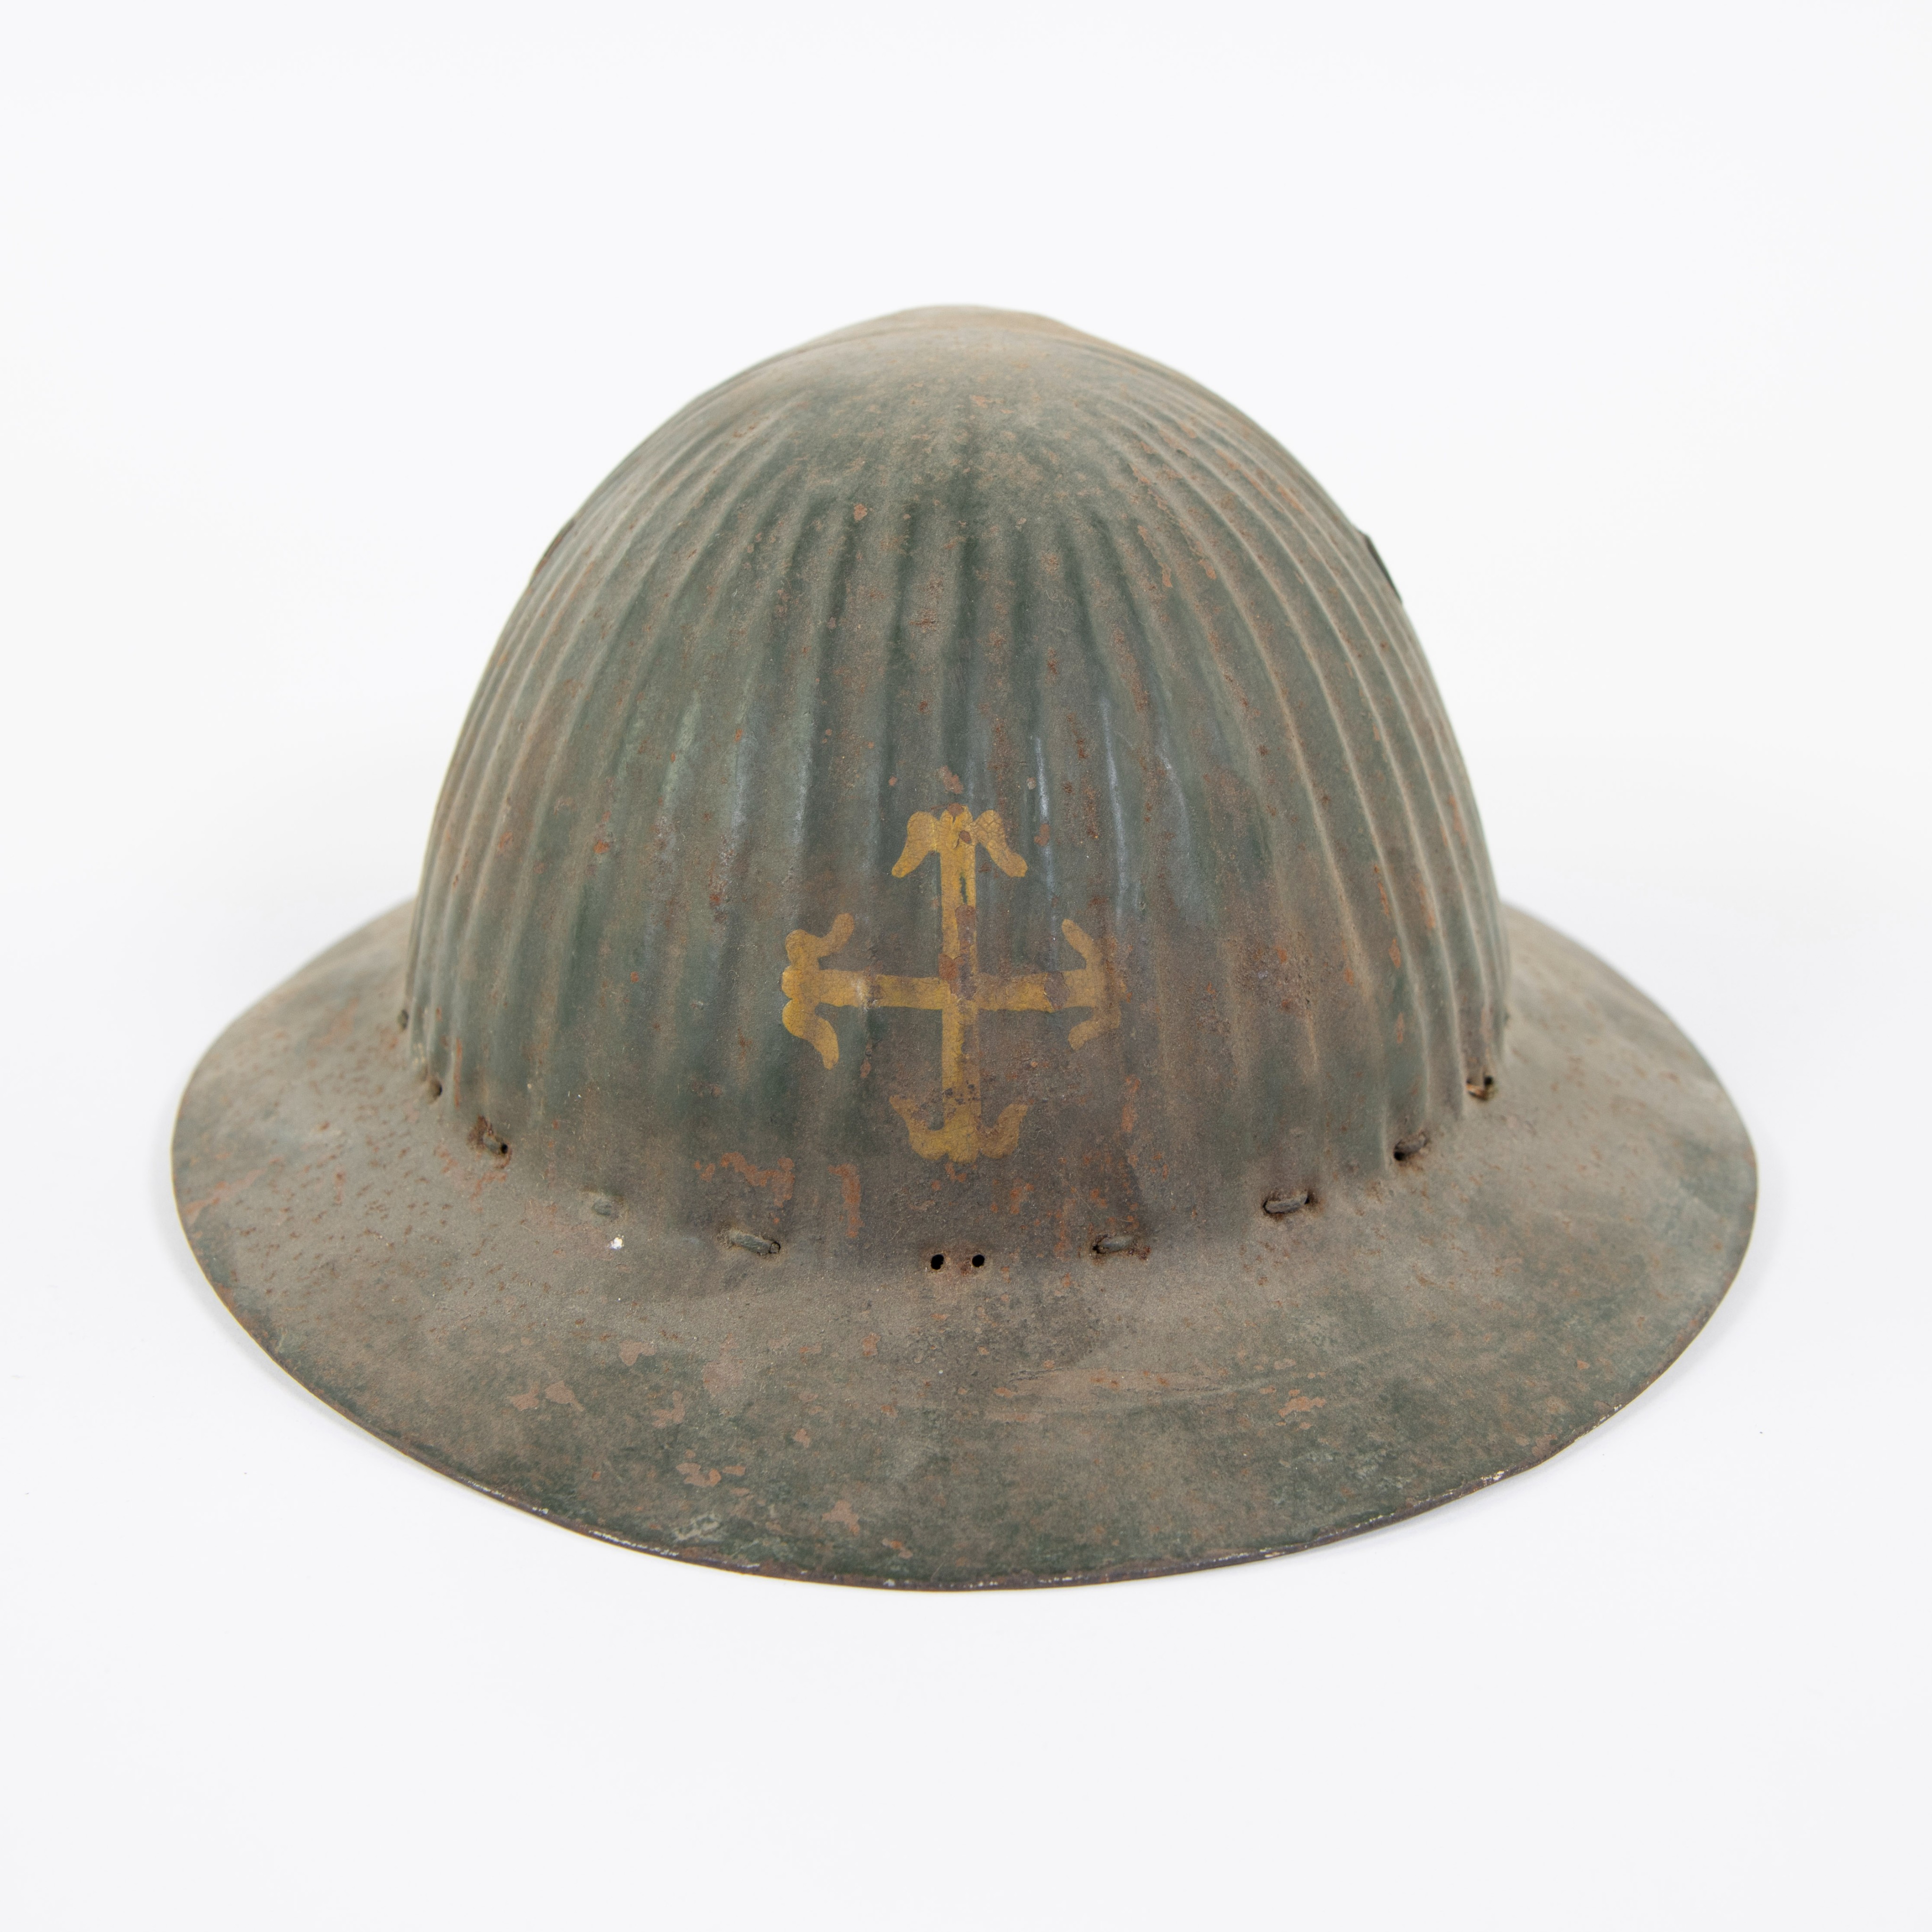 First English WW I helmet, sold to Portugal and used in the Civil War.